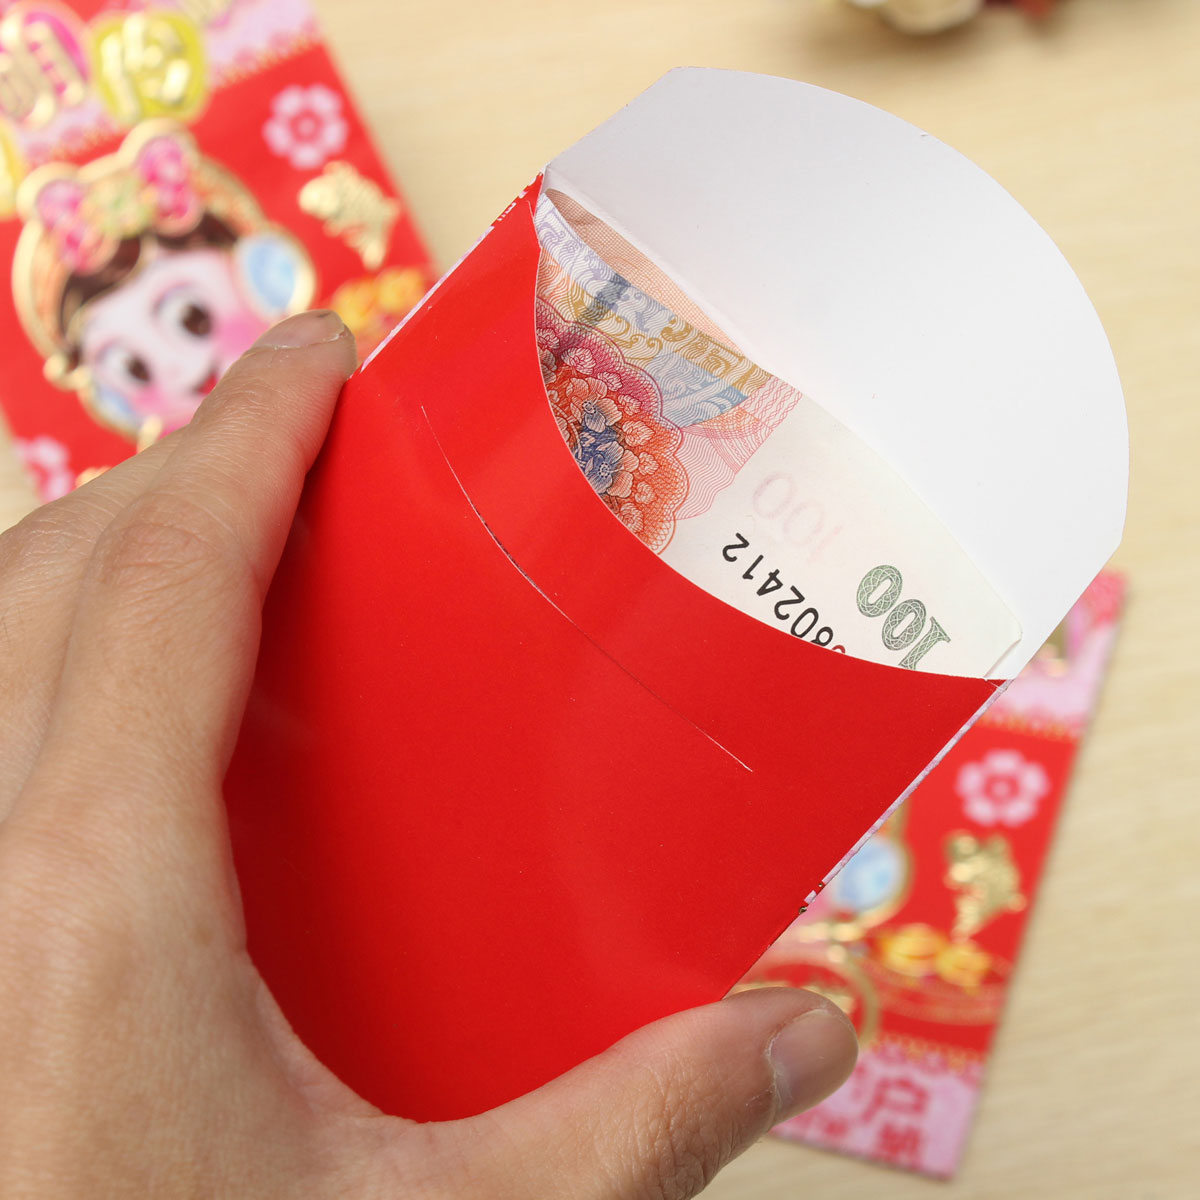 6pcs-Clever-Chinatown-Chinese-Spring-Festival-Red-Envelope-Lucky-Money-Bag-New-Year-1032466